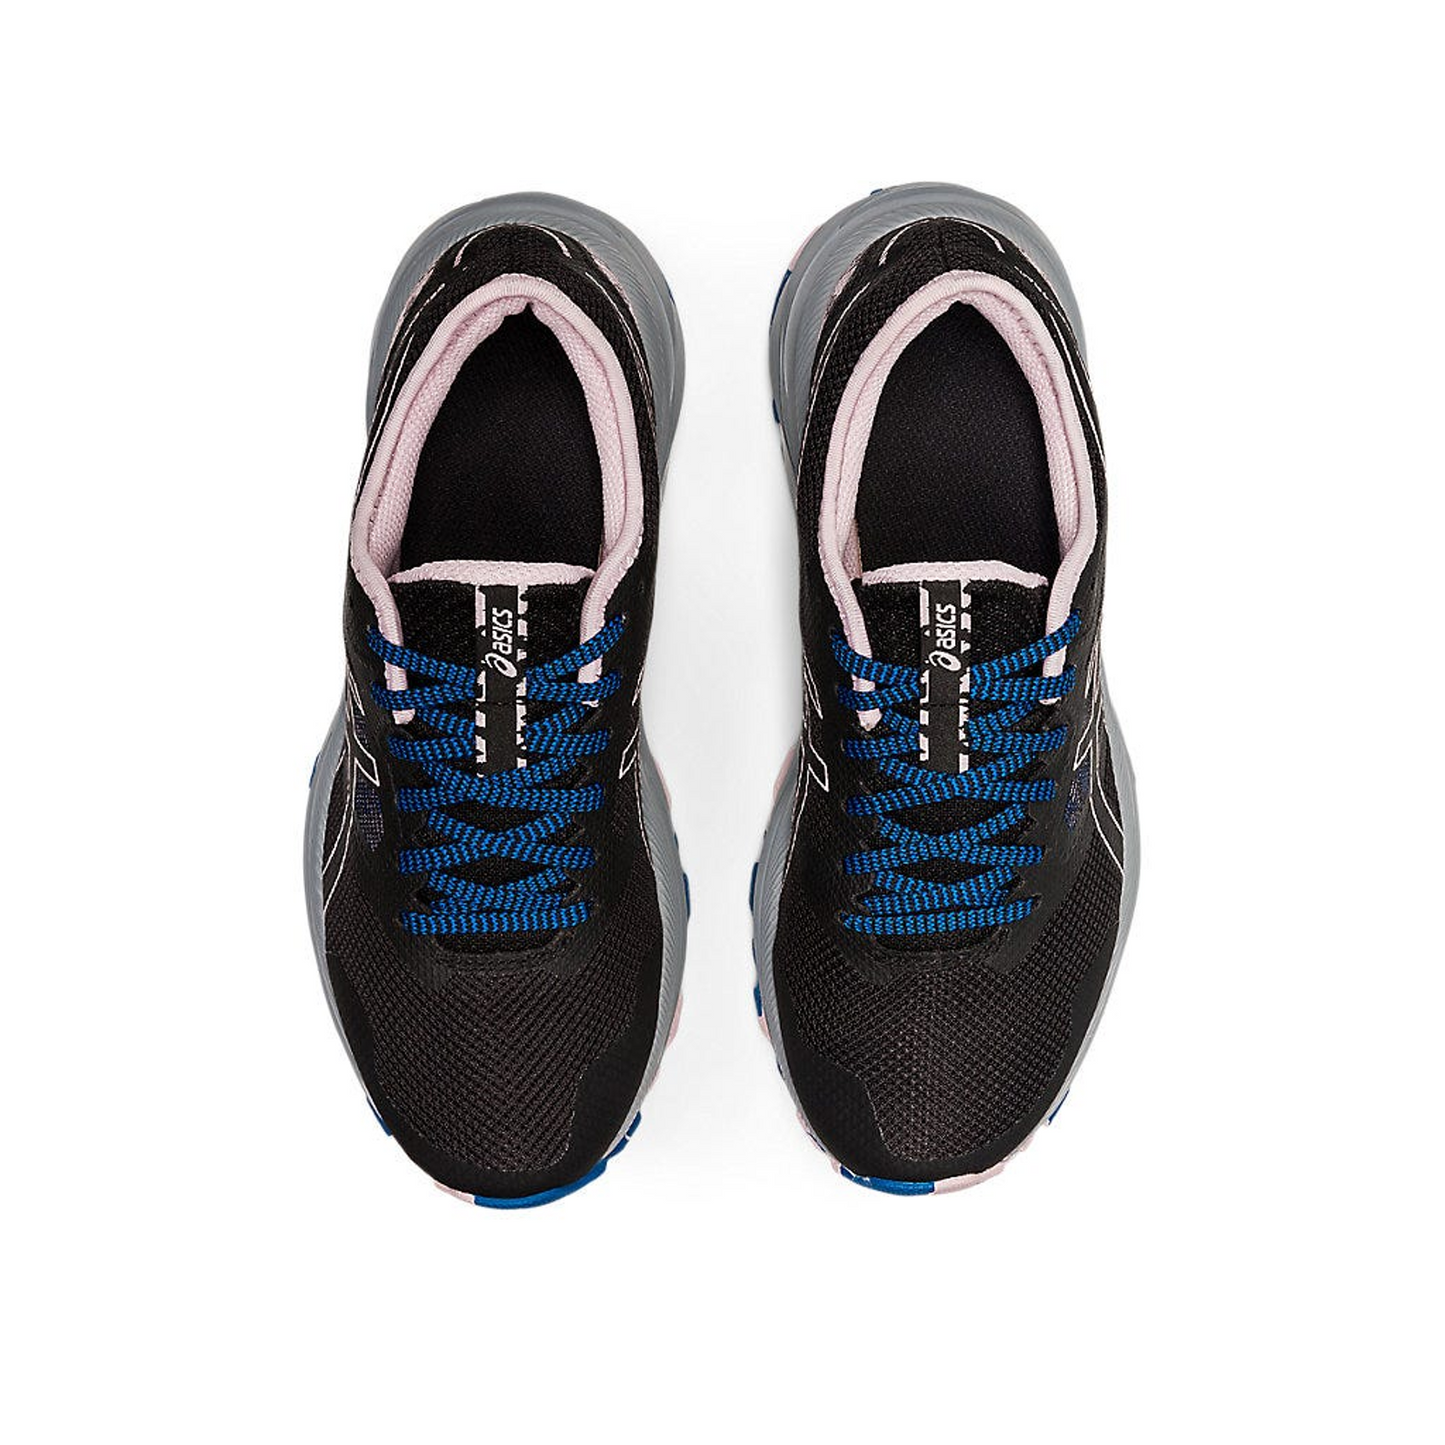 Women's Gel Excite Trail Black/Barely Rose